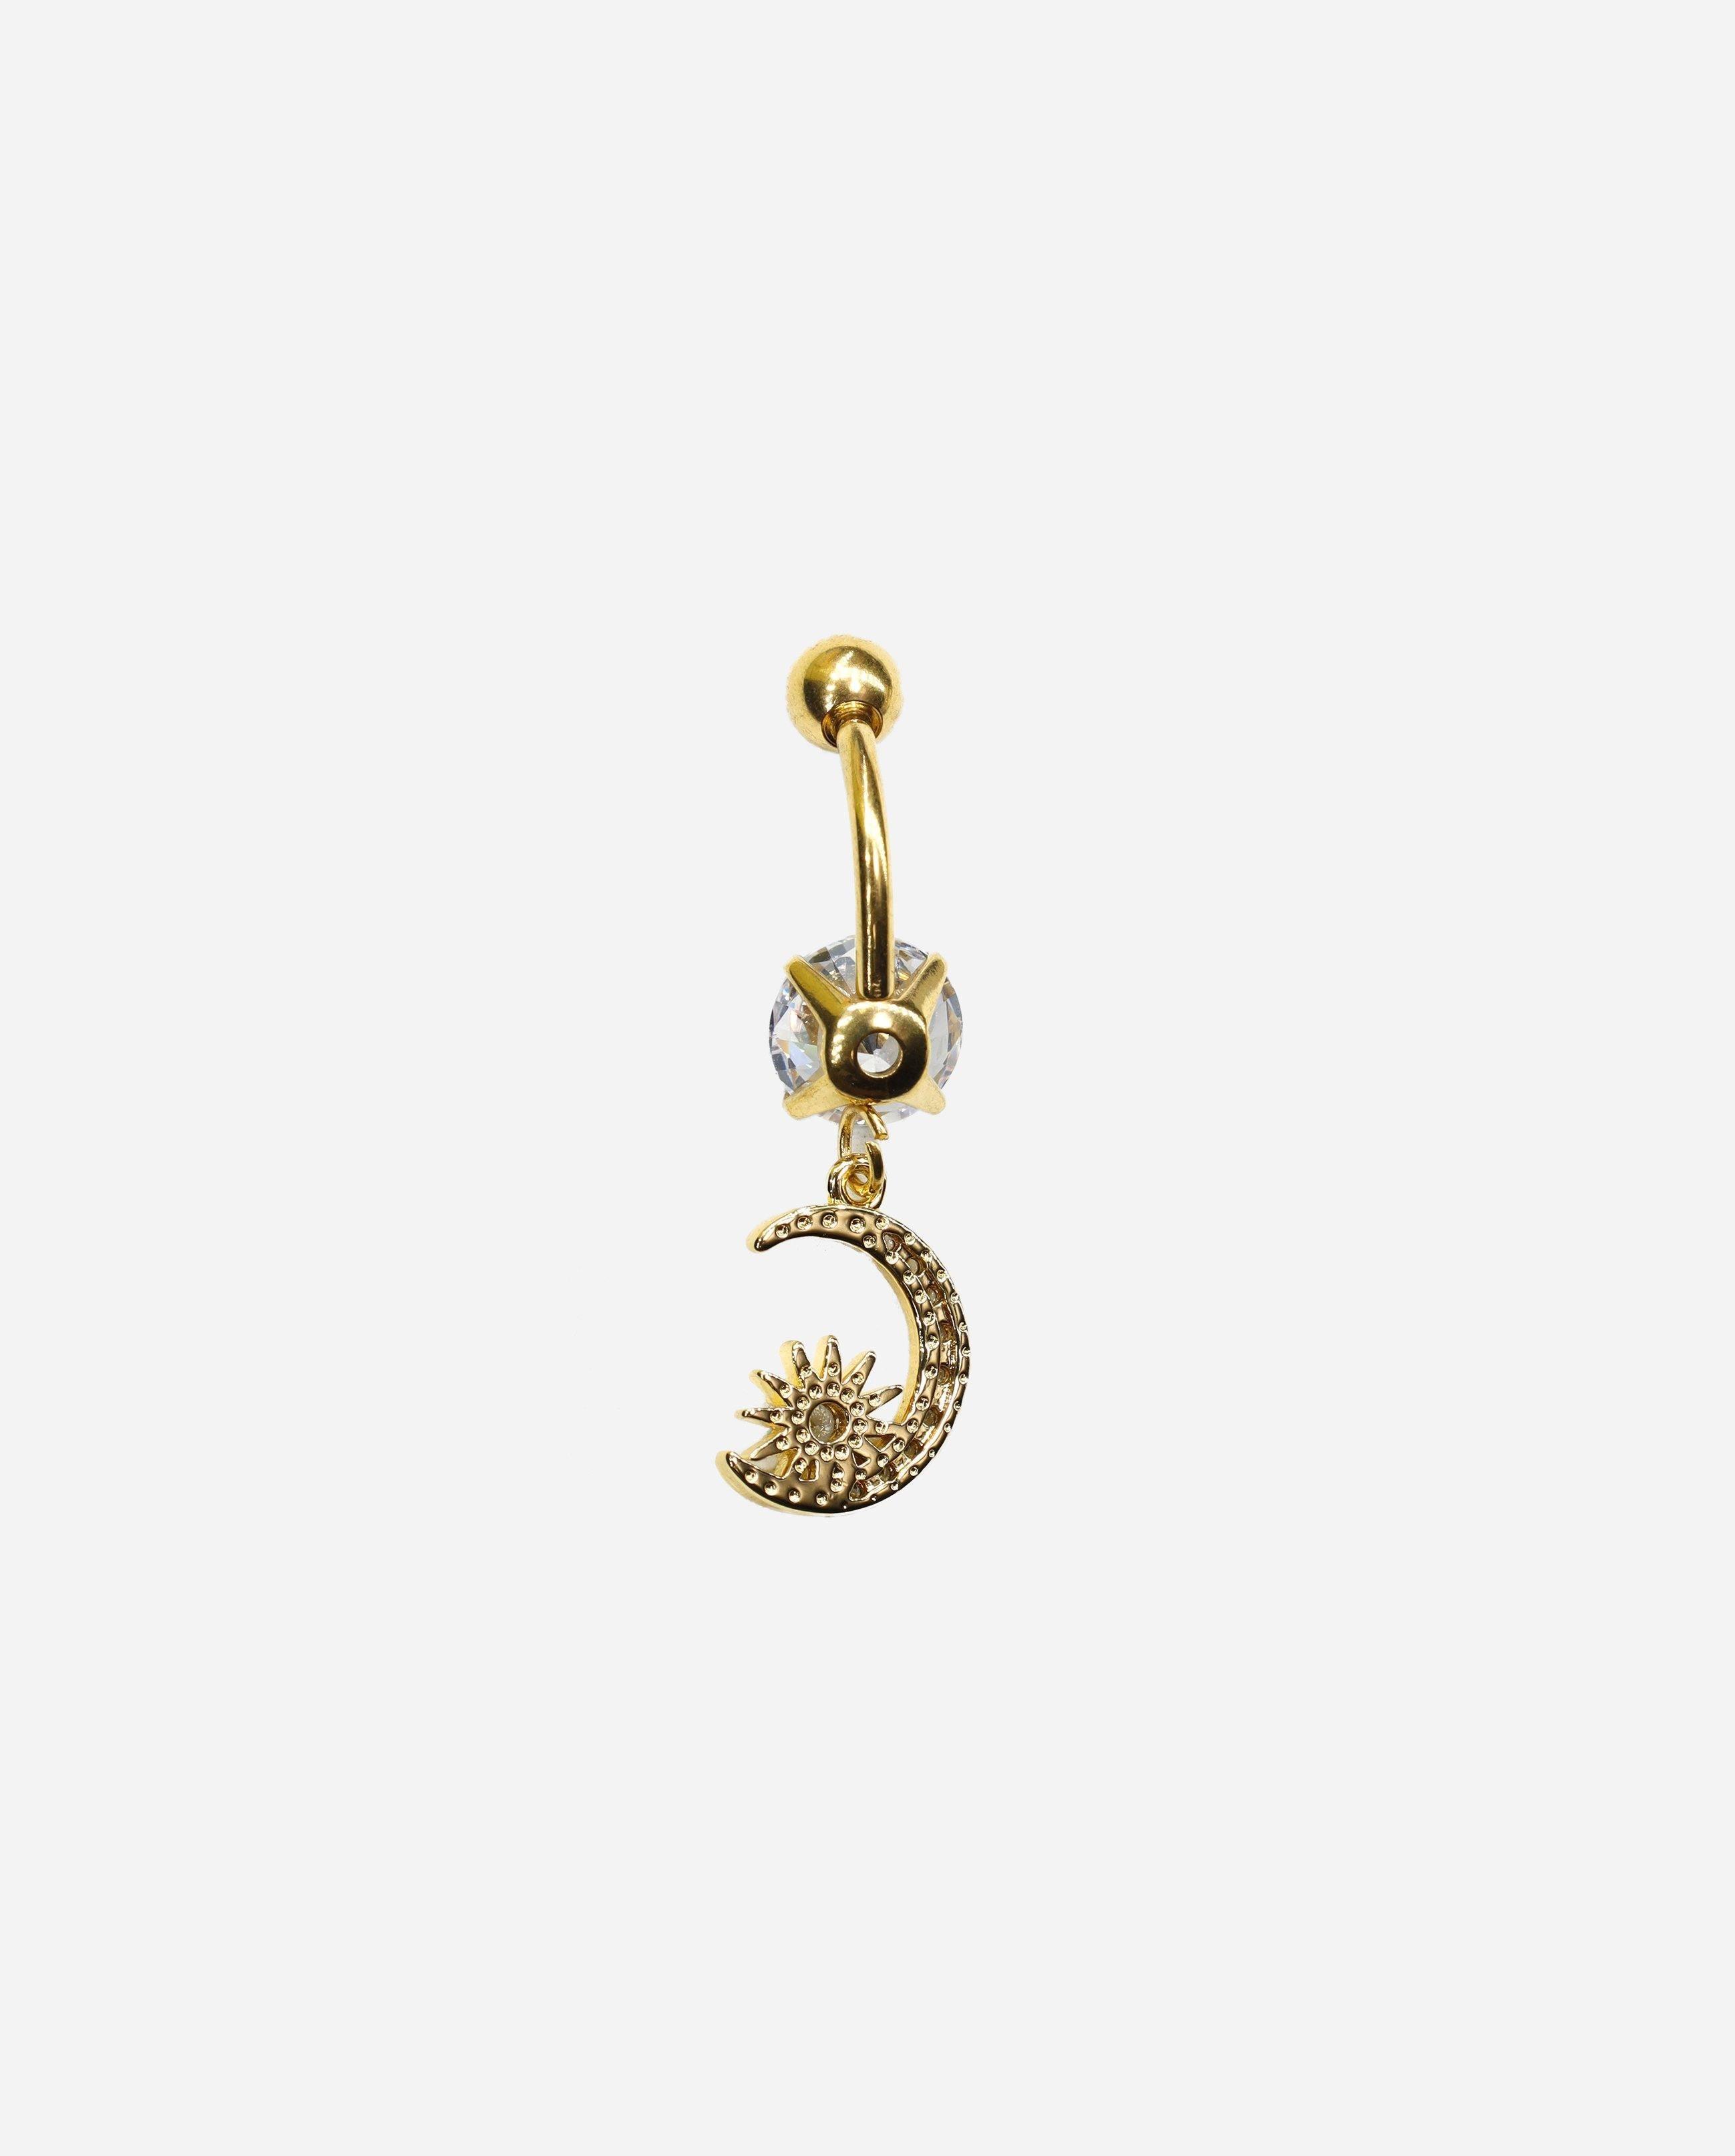 Gracias Dios Crescent Moon Dangle Belly Ring - Challenger Streetwear